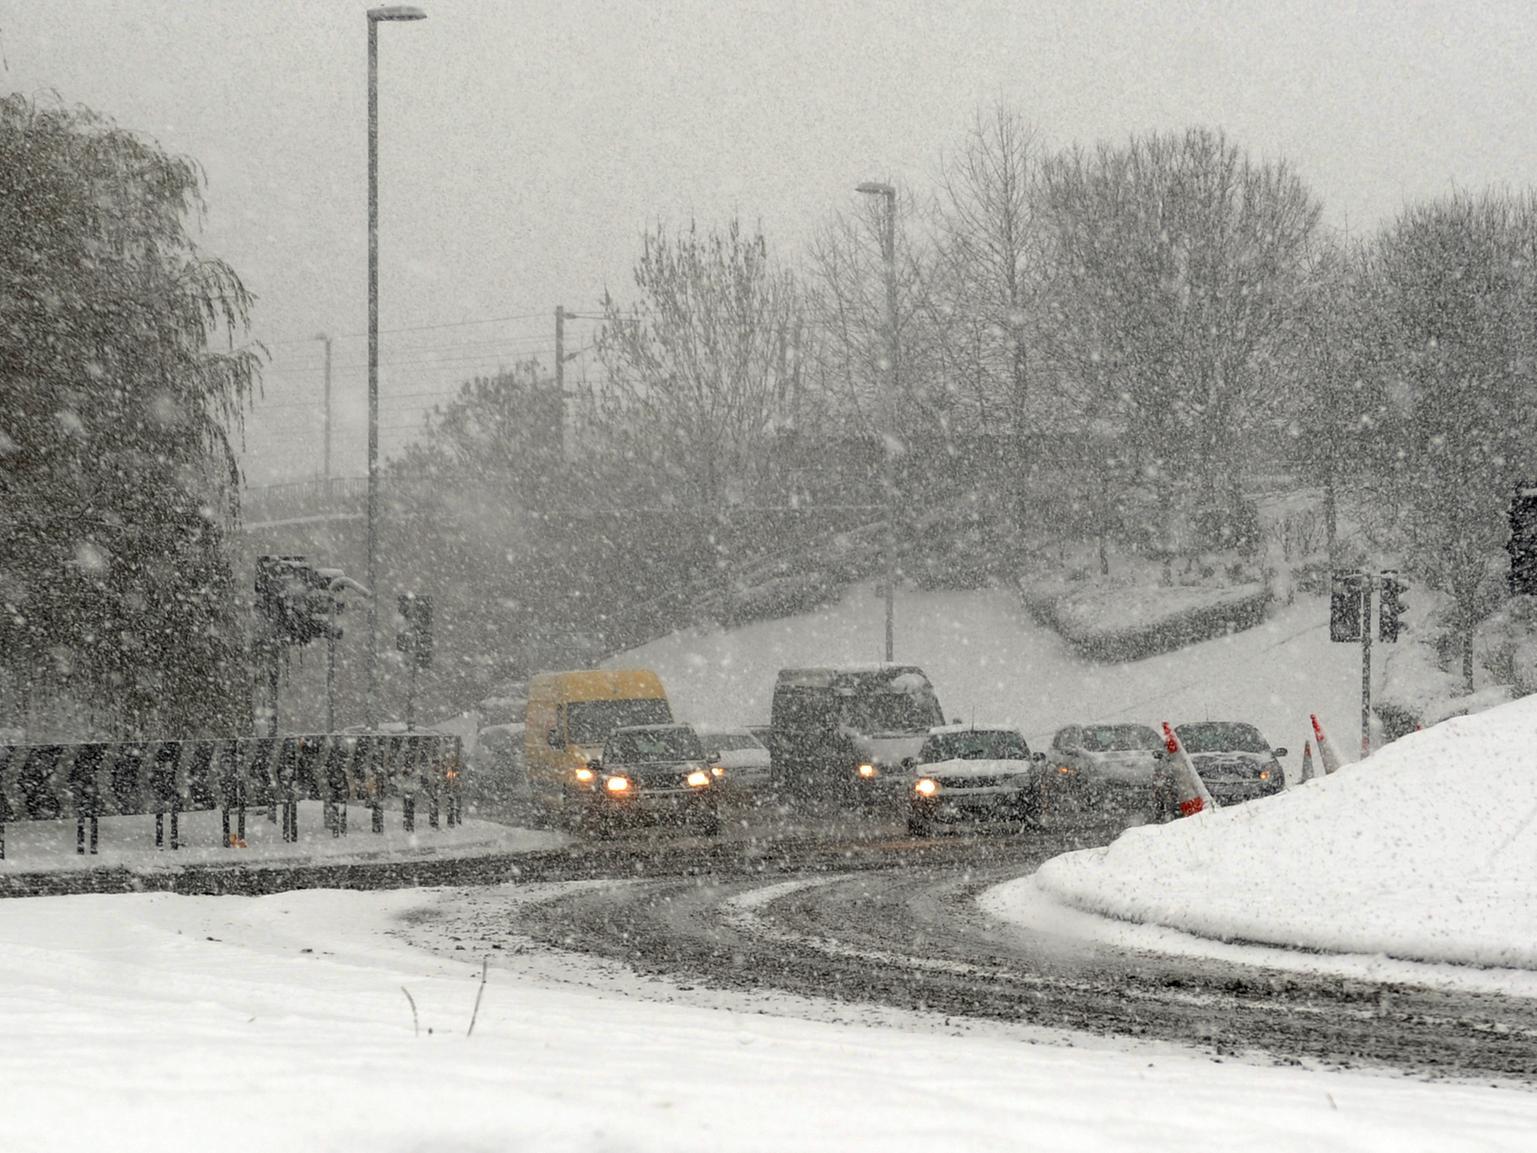 A snow blizzard made driving hazardous for commuters, pictured here at Armley Gyratory.